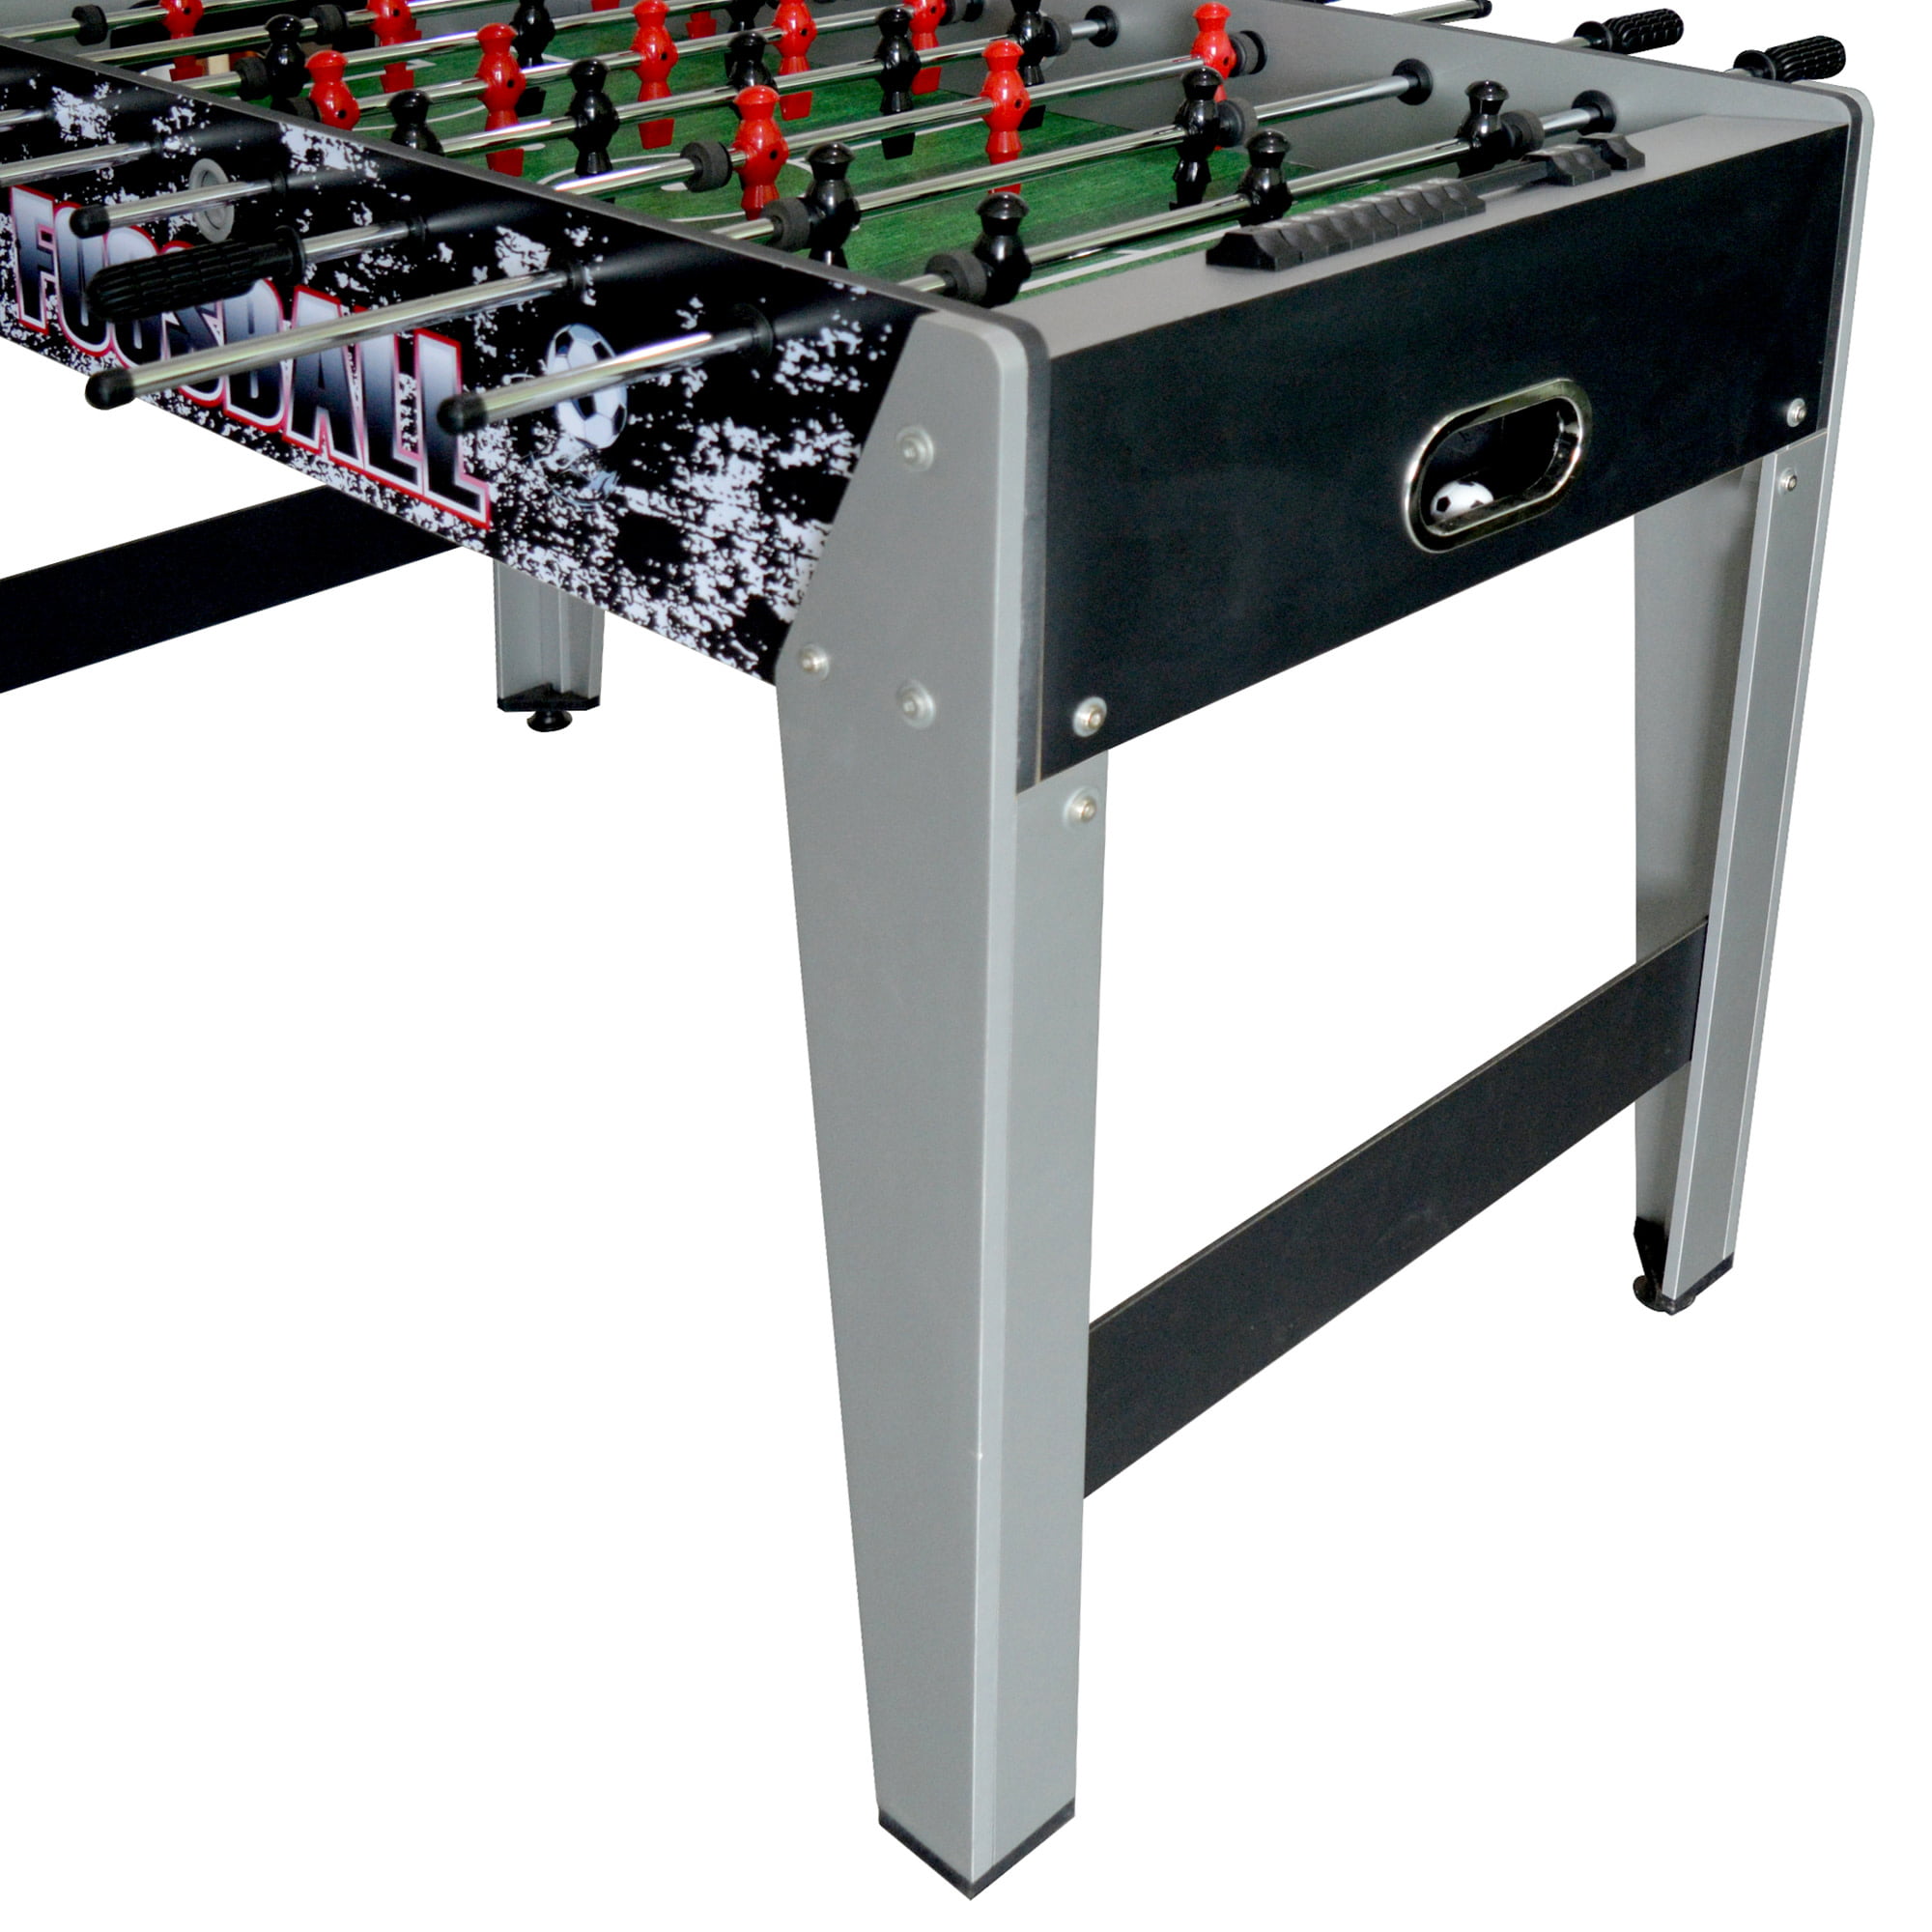 Hathaway Avalanche Foosball Table Soccer Game with Ergonomic Handles for Kids and Adults 48-in Black/Gray 